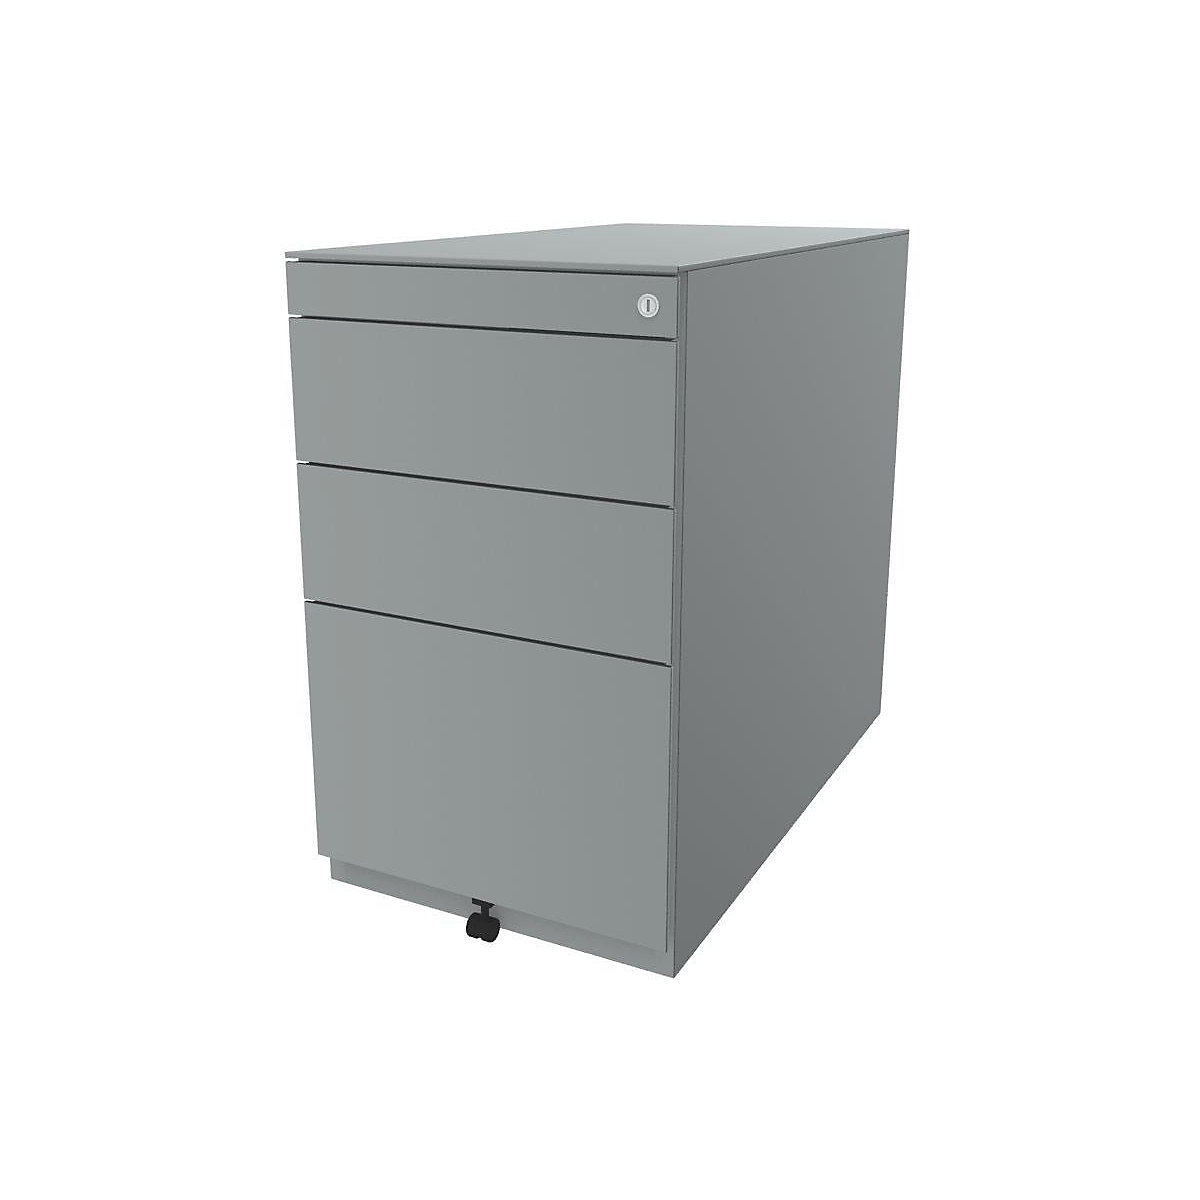 Note™ fixed pedestal, with 2 universal drawers, 1 suspension file drawer – BISLEY, with top, depth 775 mm, silver-5